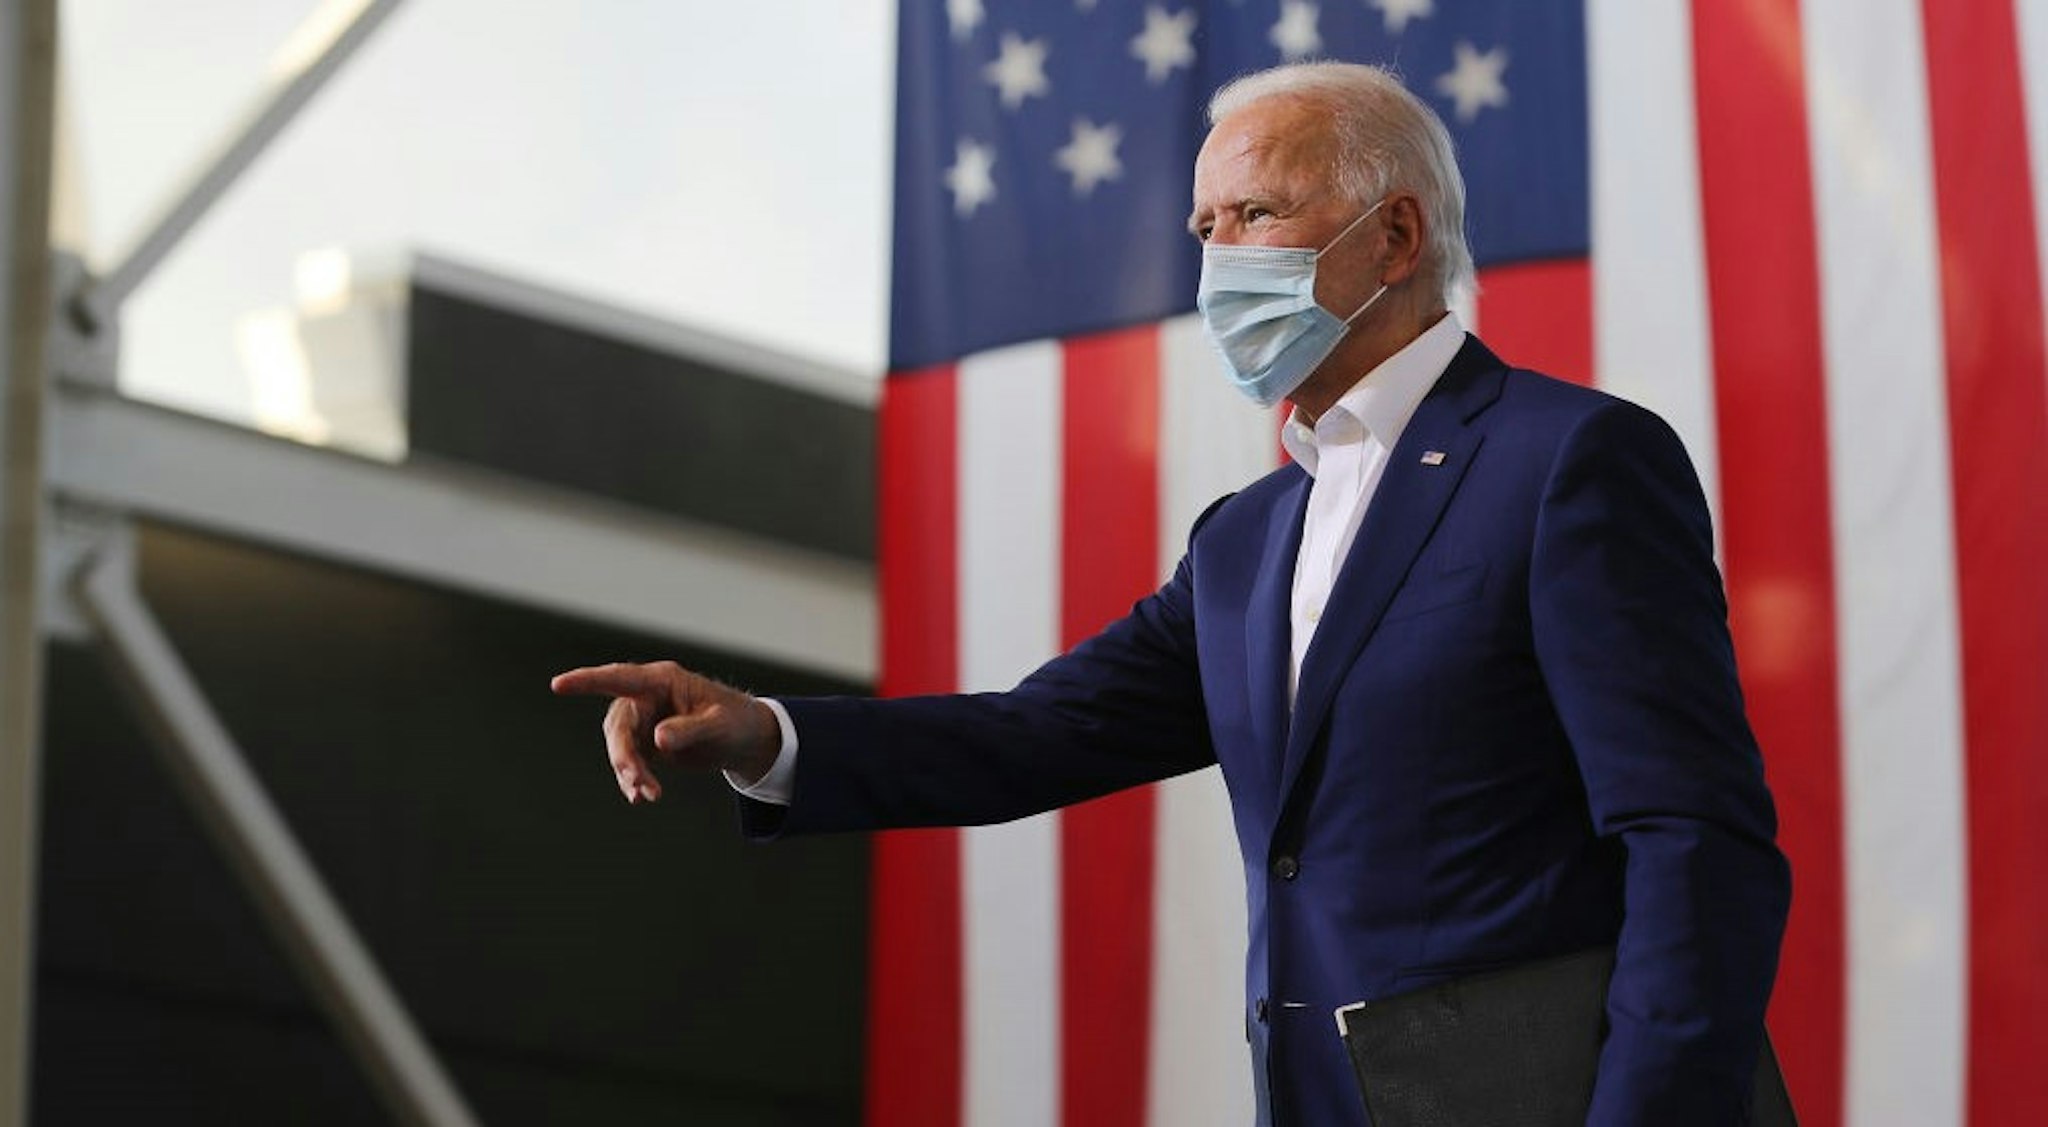 MIRAMAR, FLORIDA - OCTOBER 13: Wearing a face mask to reduce the risk posed by the coronavirus, Democratic presidential nominee Joe Biden points to supporters during a drive-in voter mobilization event at Miramar Regional Park October 13, 2020 in Miramar, Florida. With three weeks until Election Day, Biden is campaigning in Florida. (Photo by